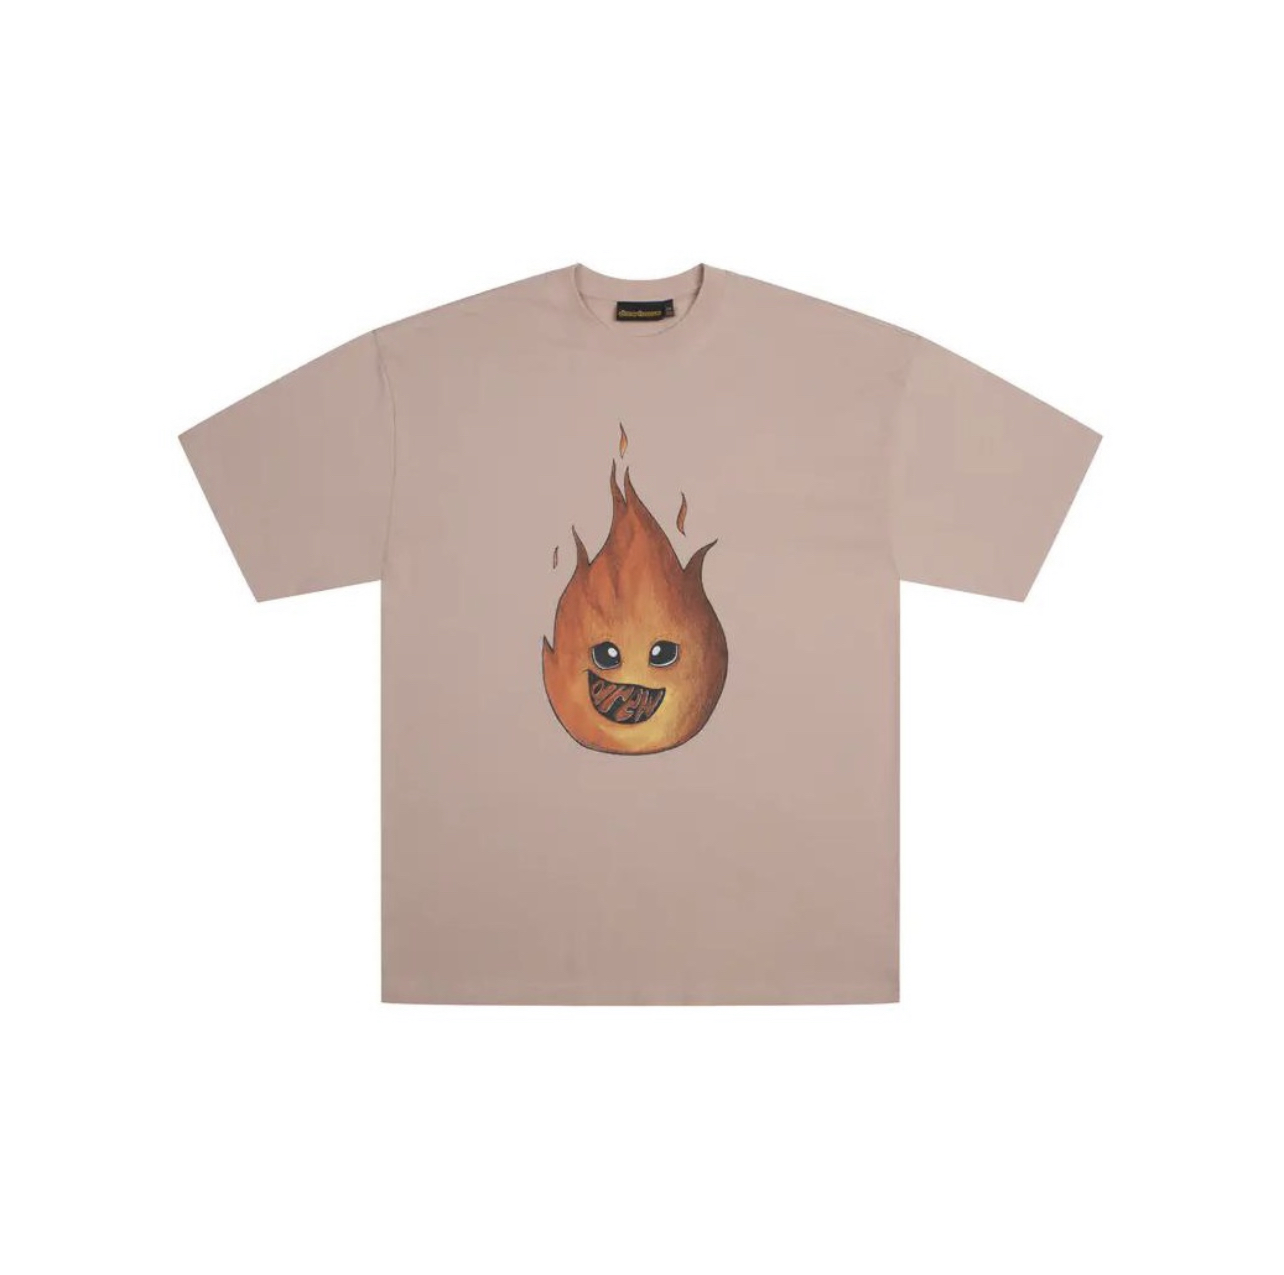 Drew House FLAME DUSTY ROSE TEE